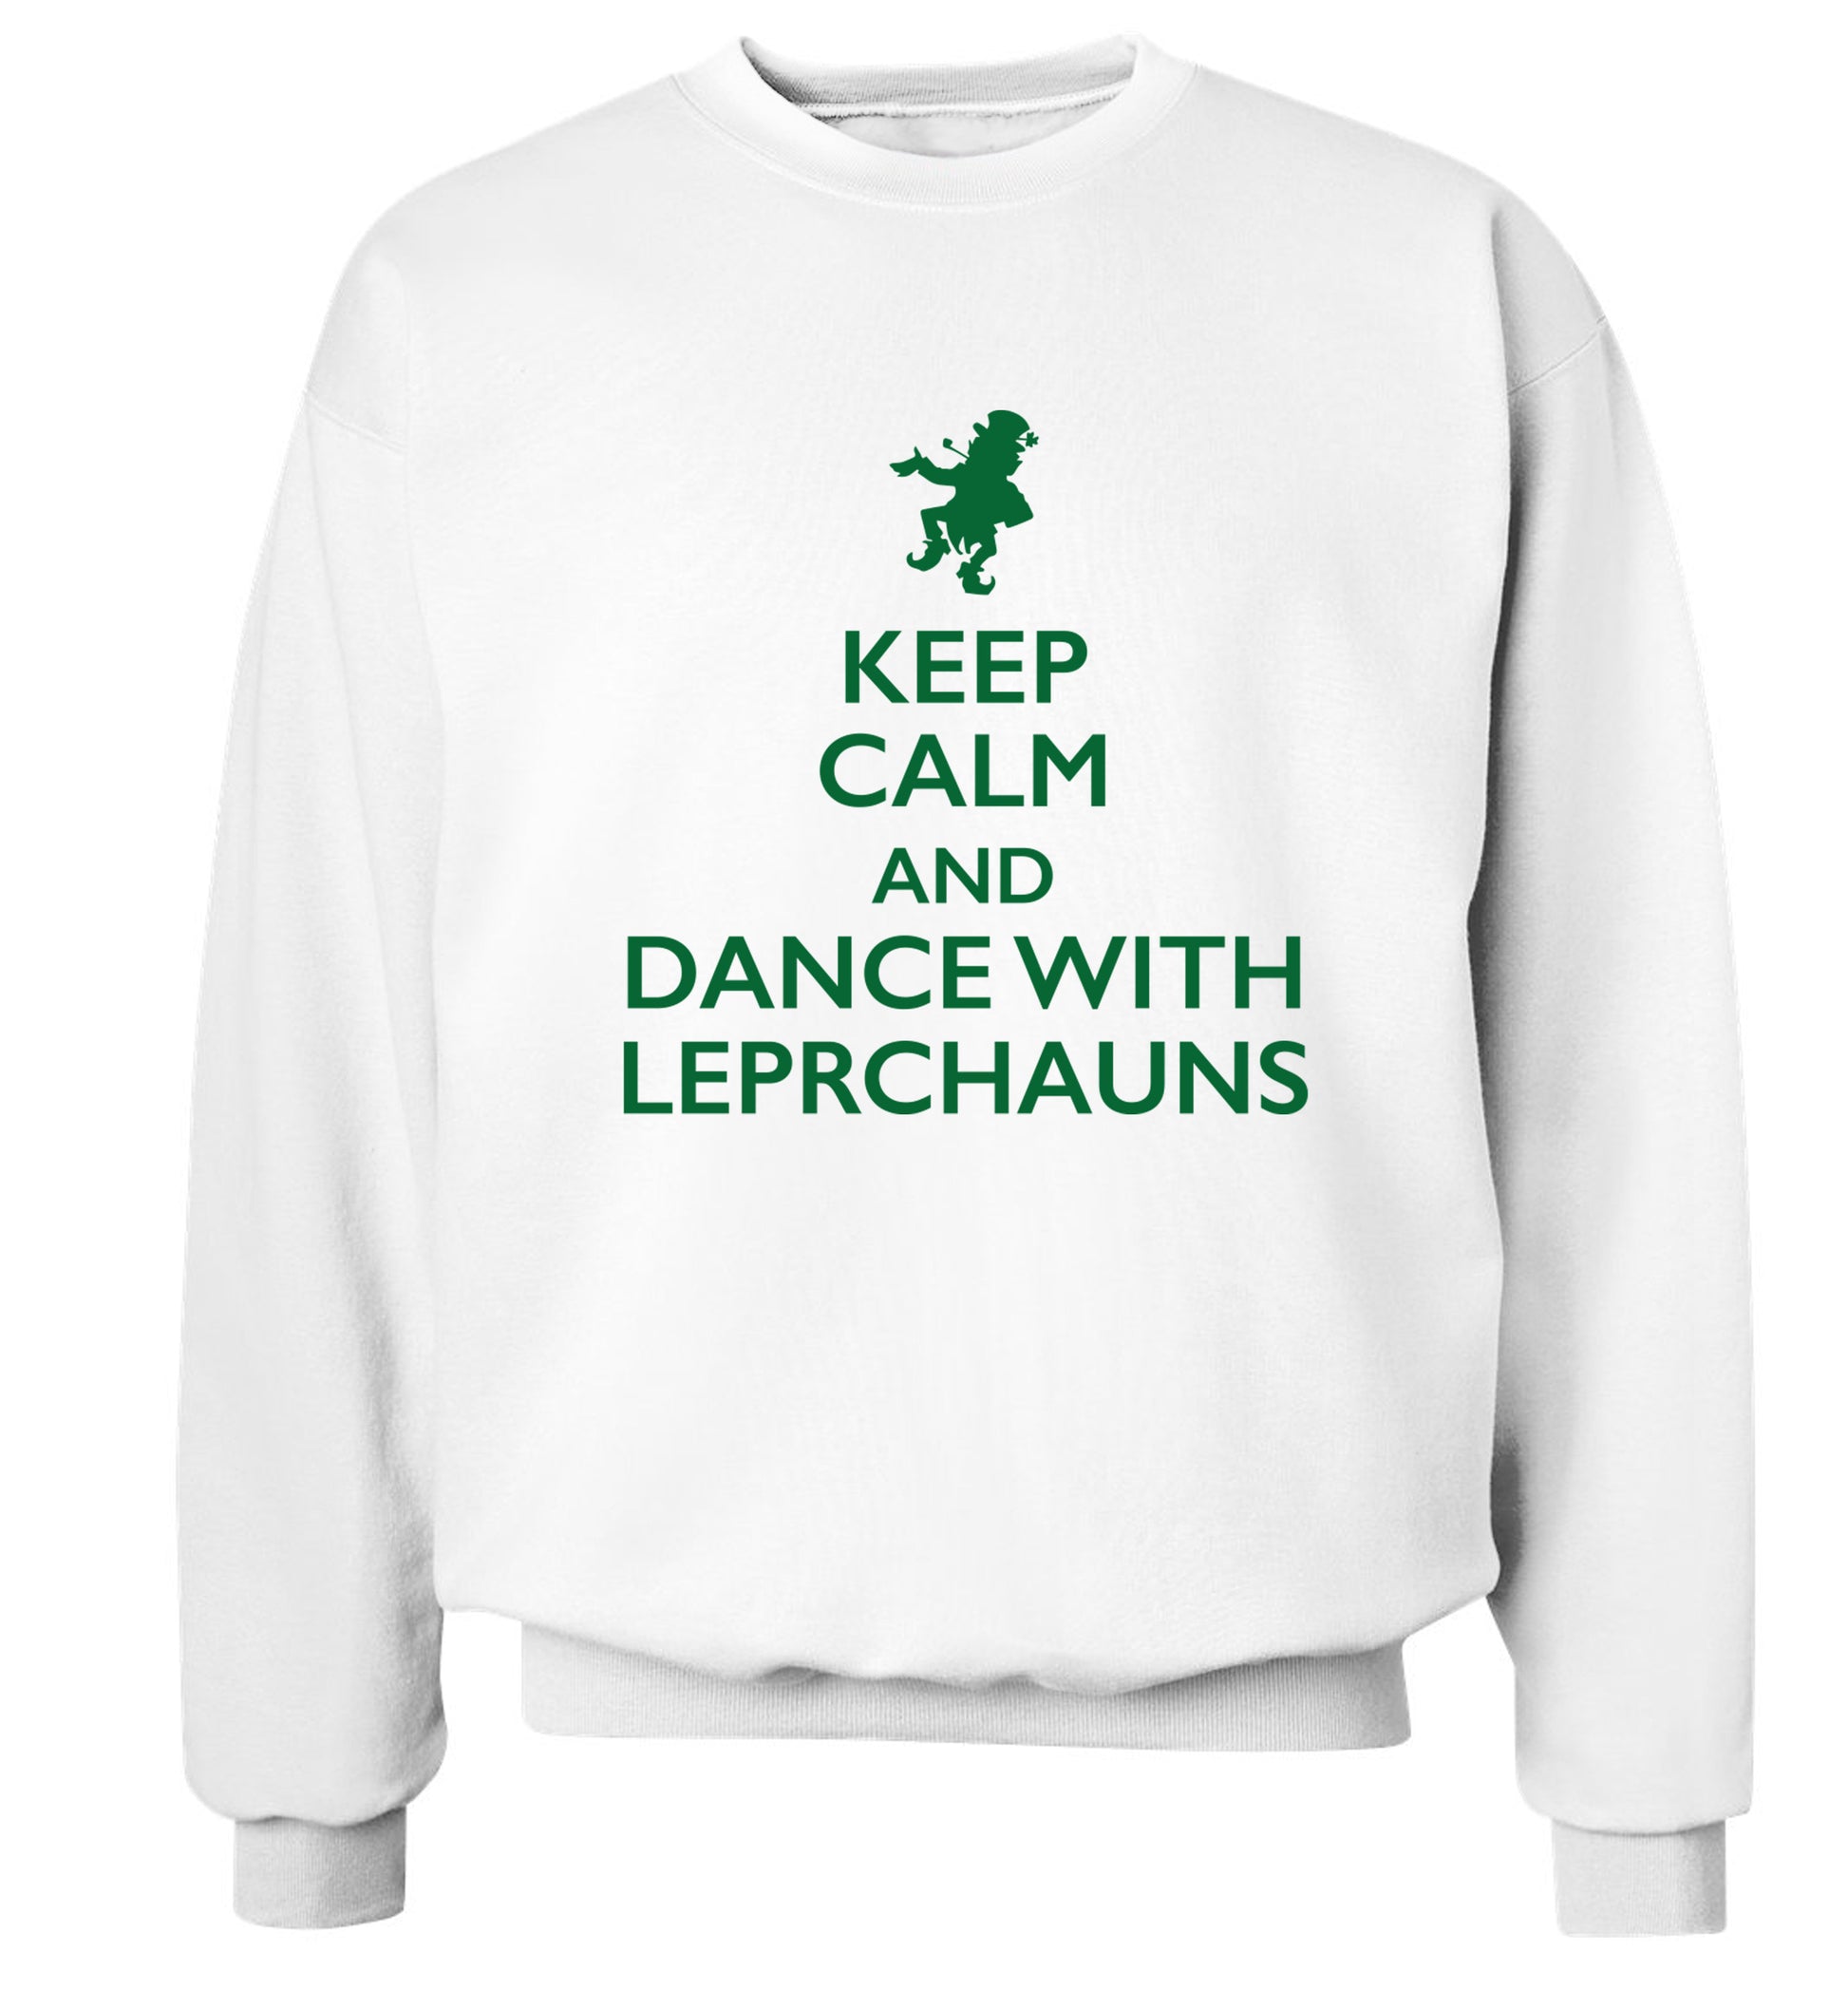 Keep calm and dance with leprechauns Adult's unisex white Sweater 2XL